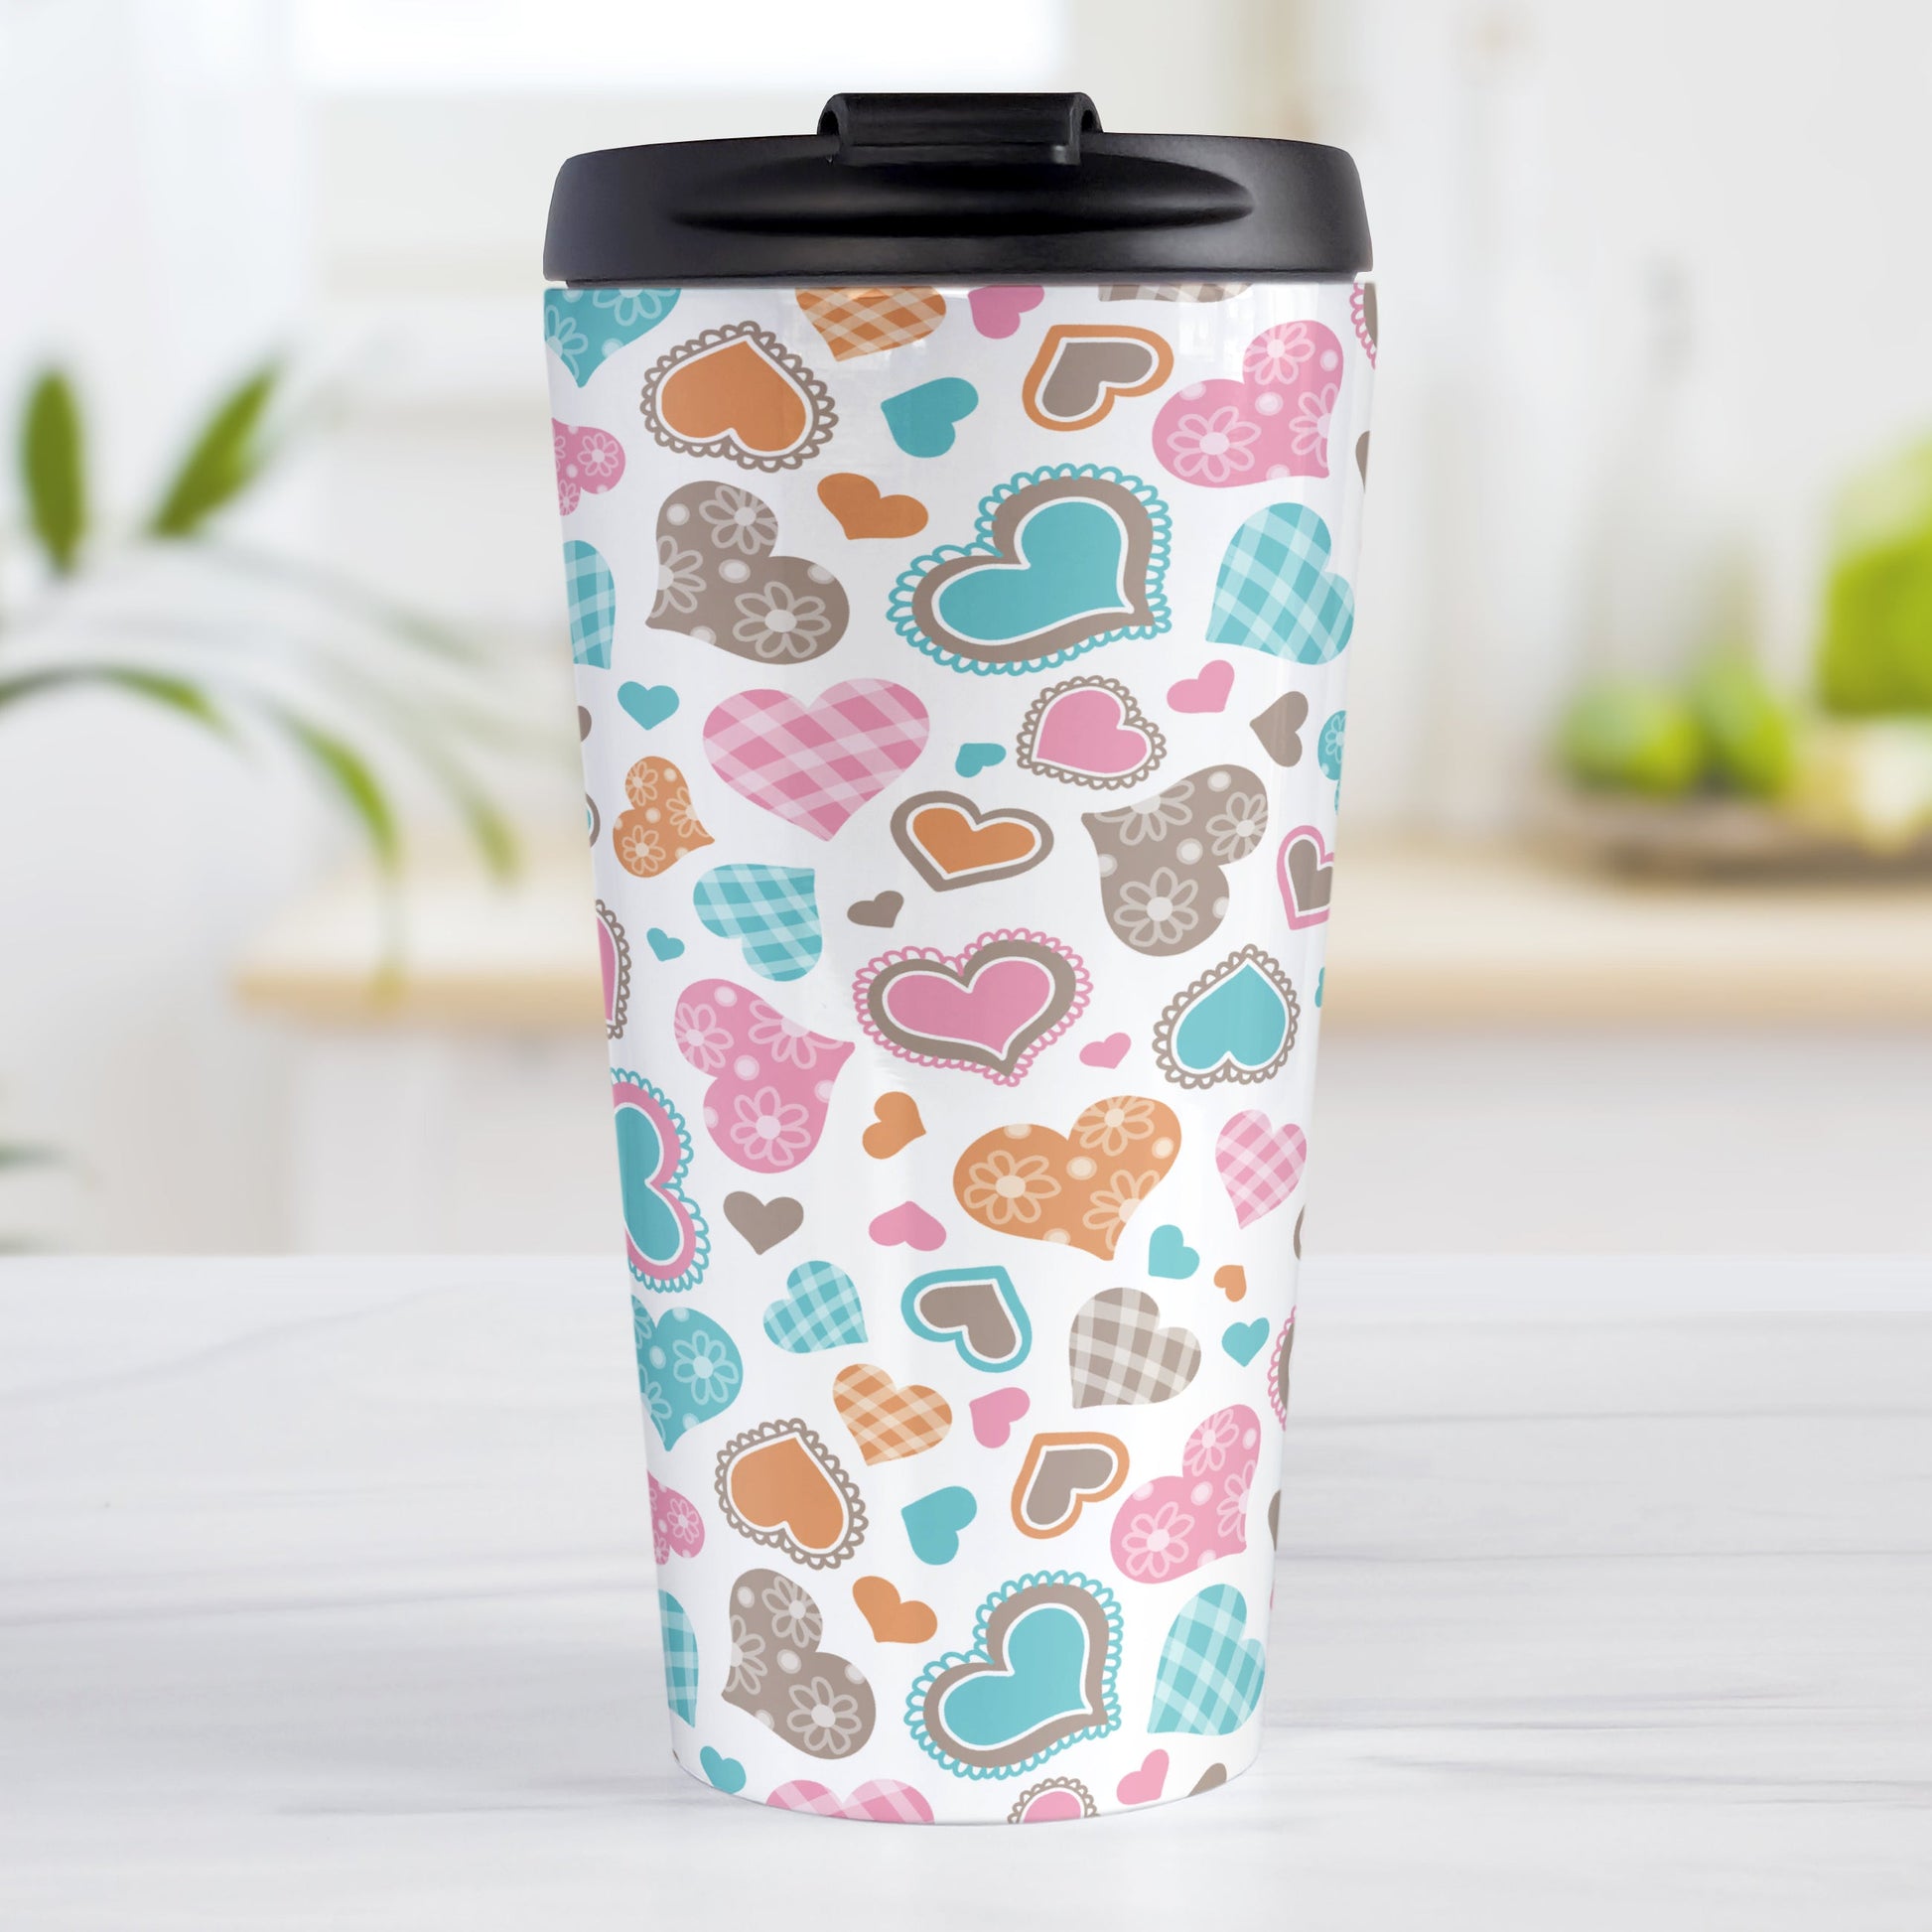 Cutesy Hearts Pattern Travel Mug (15oz, stainless steel insulated) at Amy's Coffee Mugs